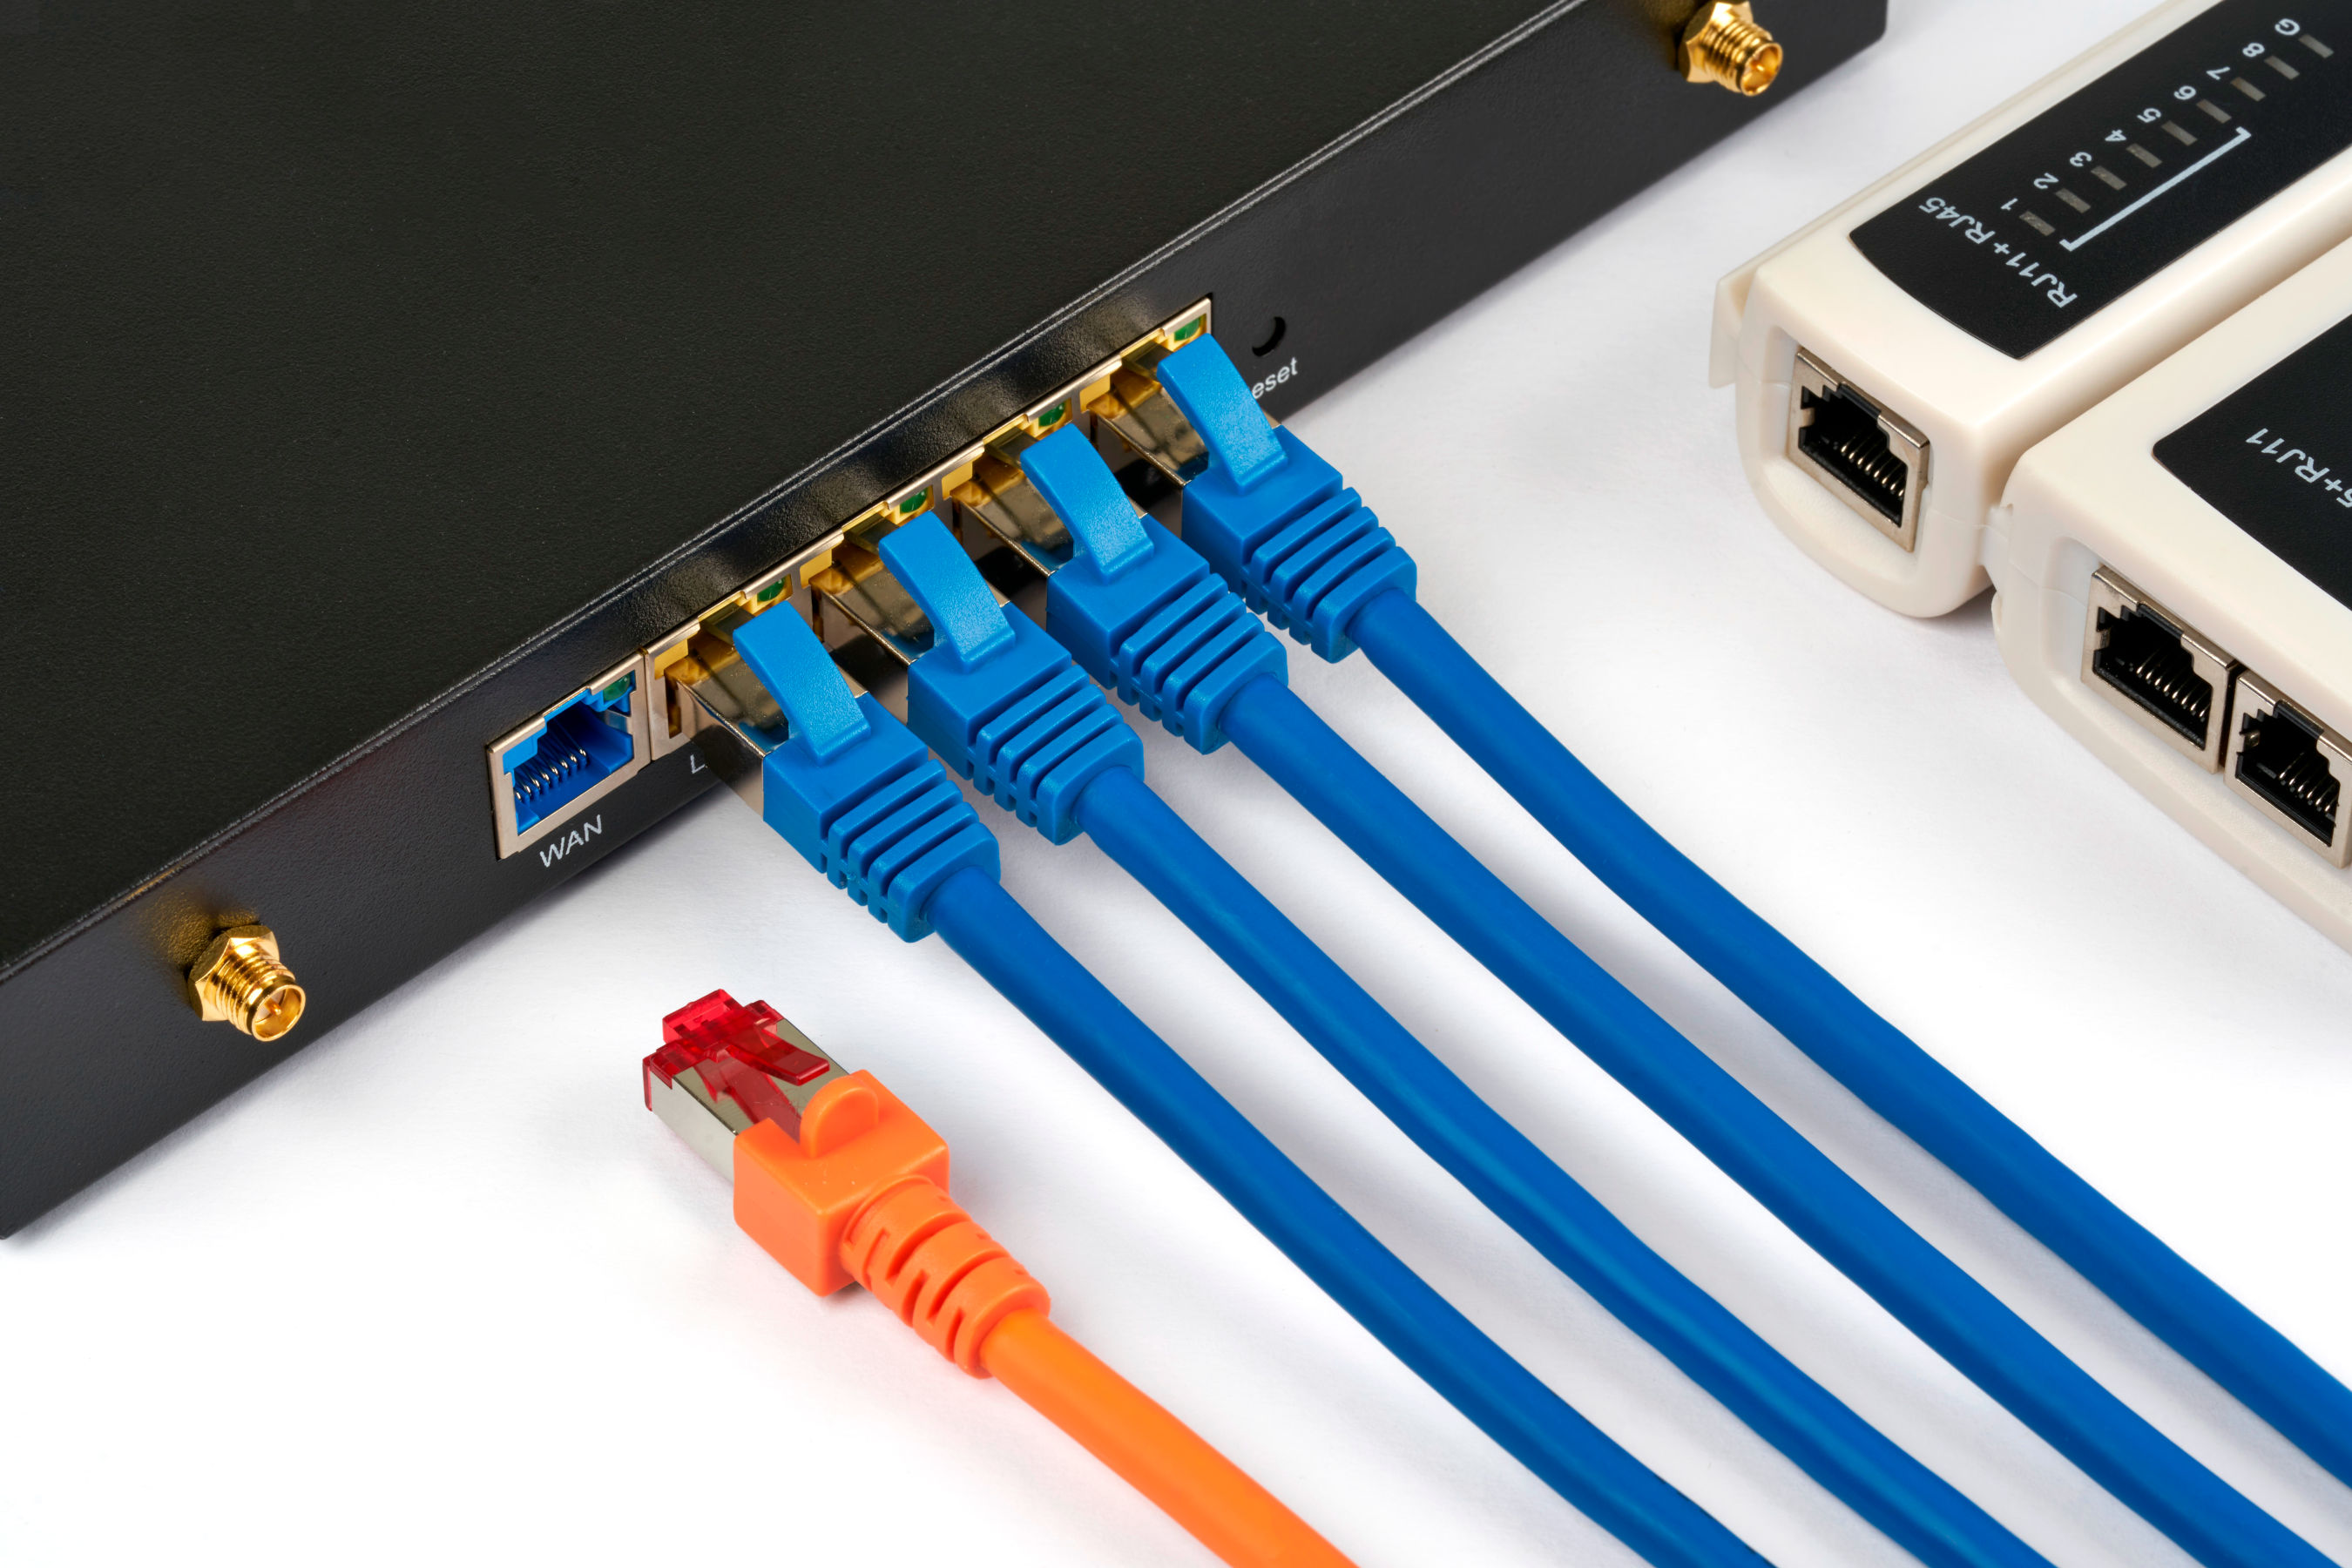 Network switch with connected blue network cables and an orange network cable.